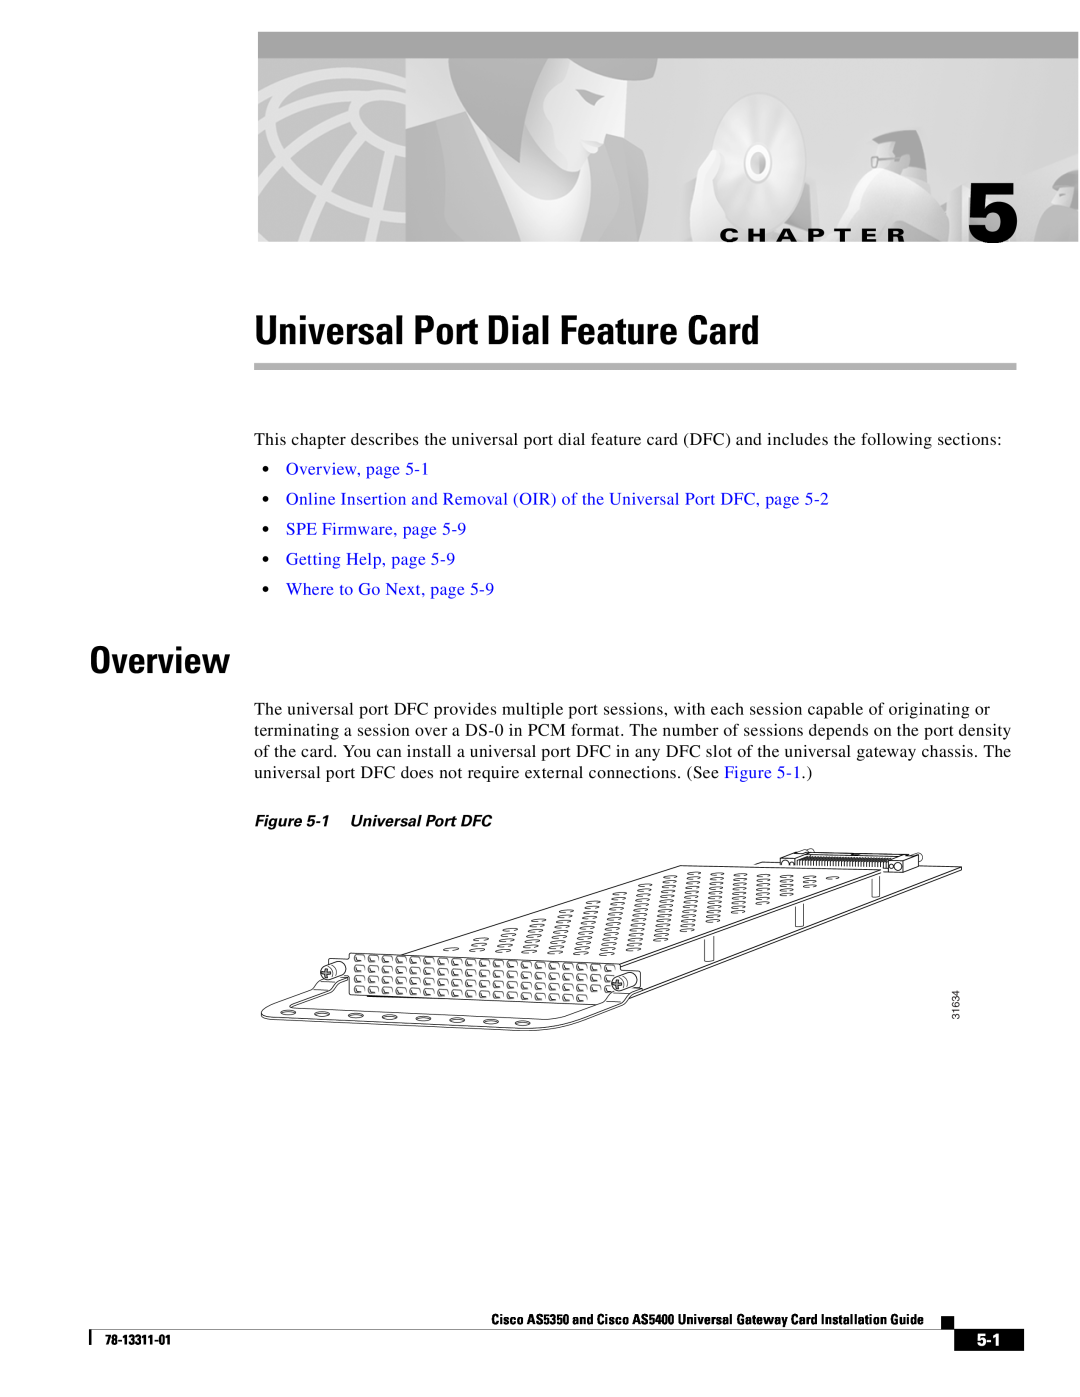 Cisco Systems AS5400 Universal Port Dial Feature Card, Online Insertion and Removal OIR of the Universal Port DFC, page 